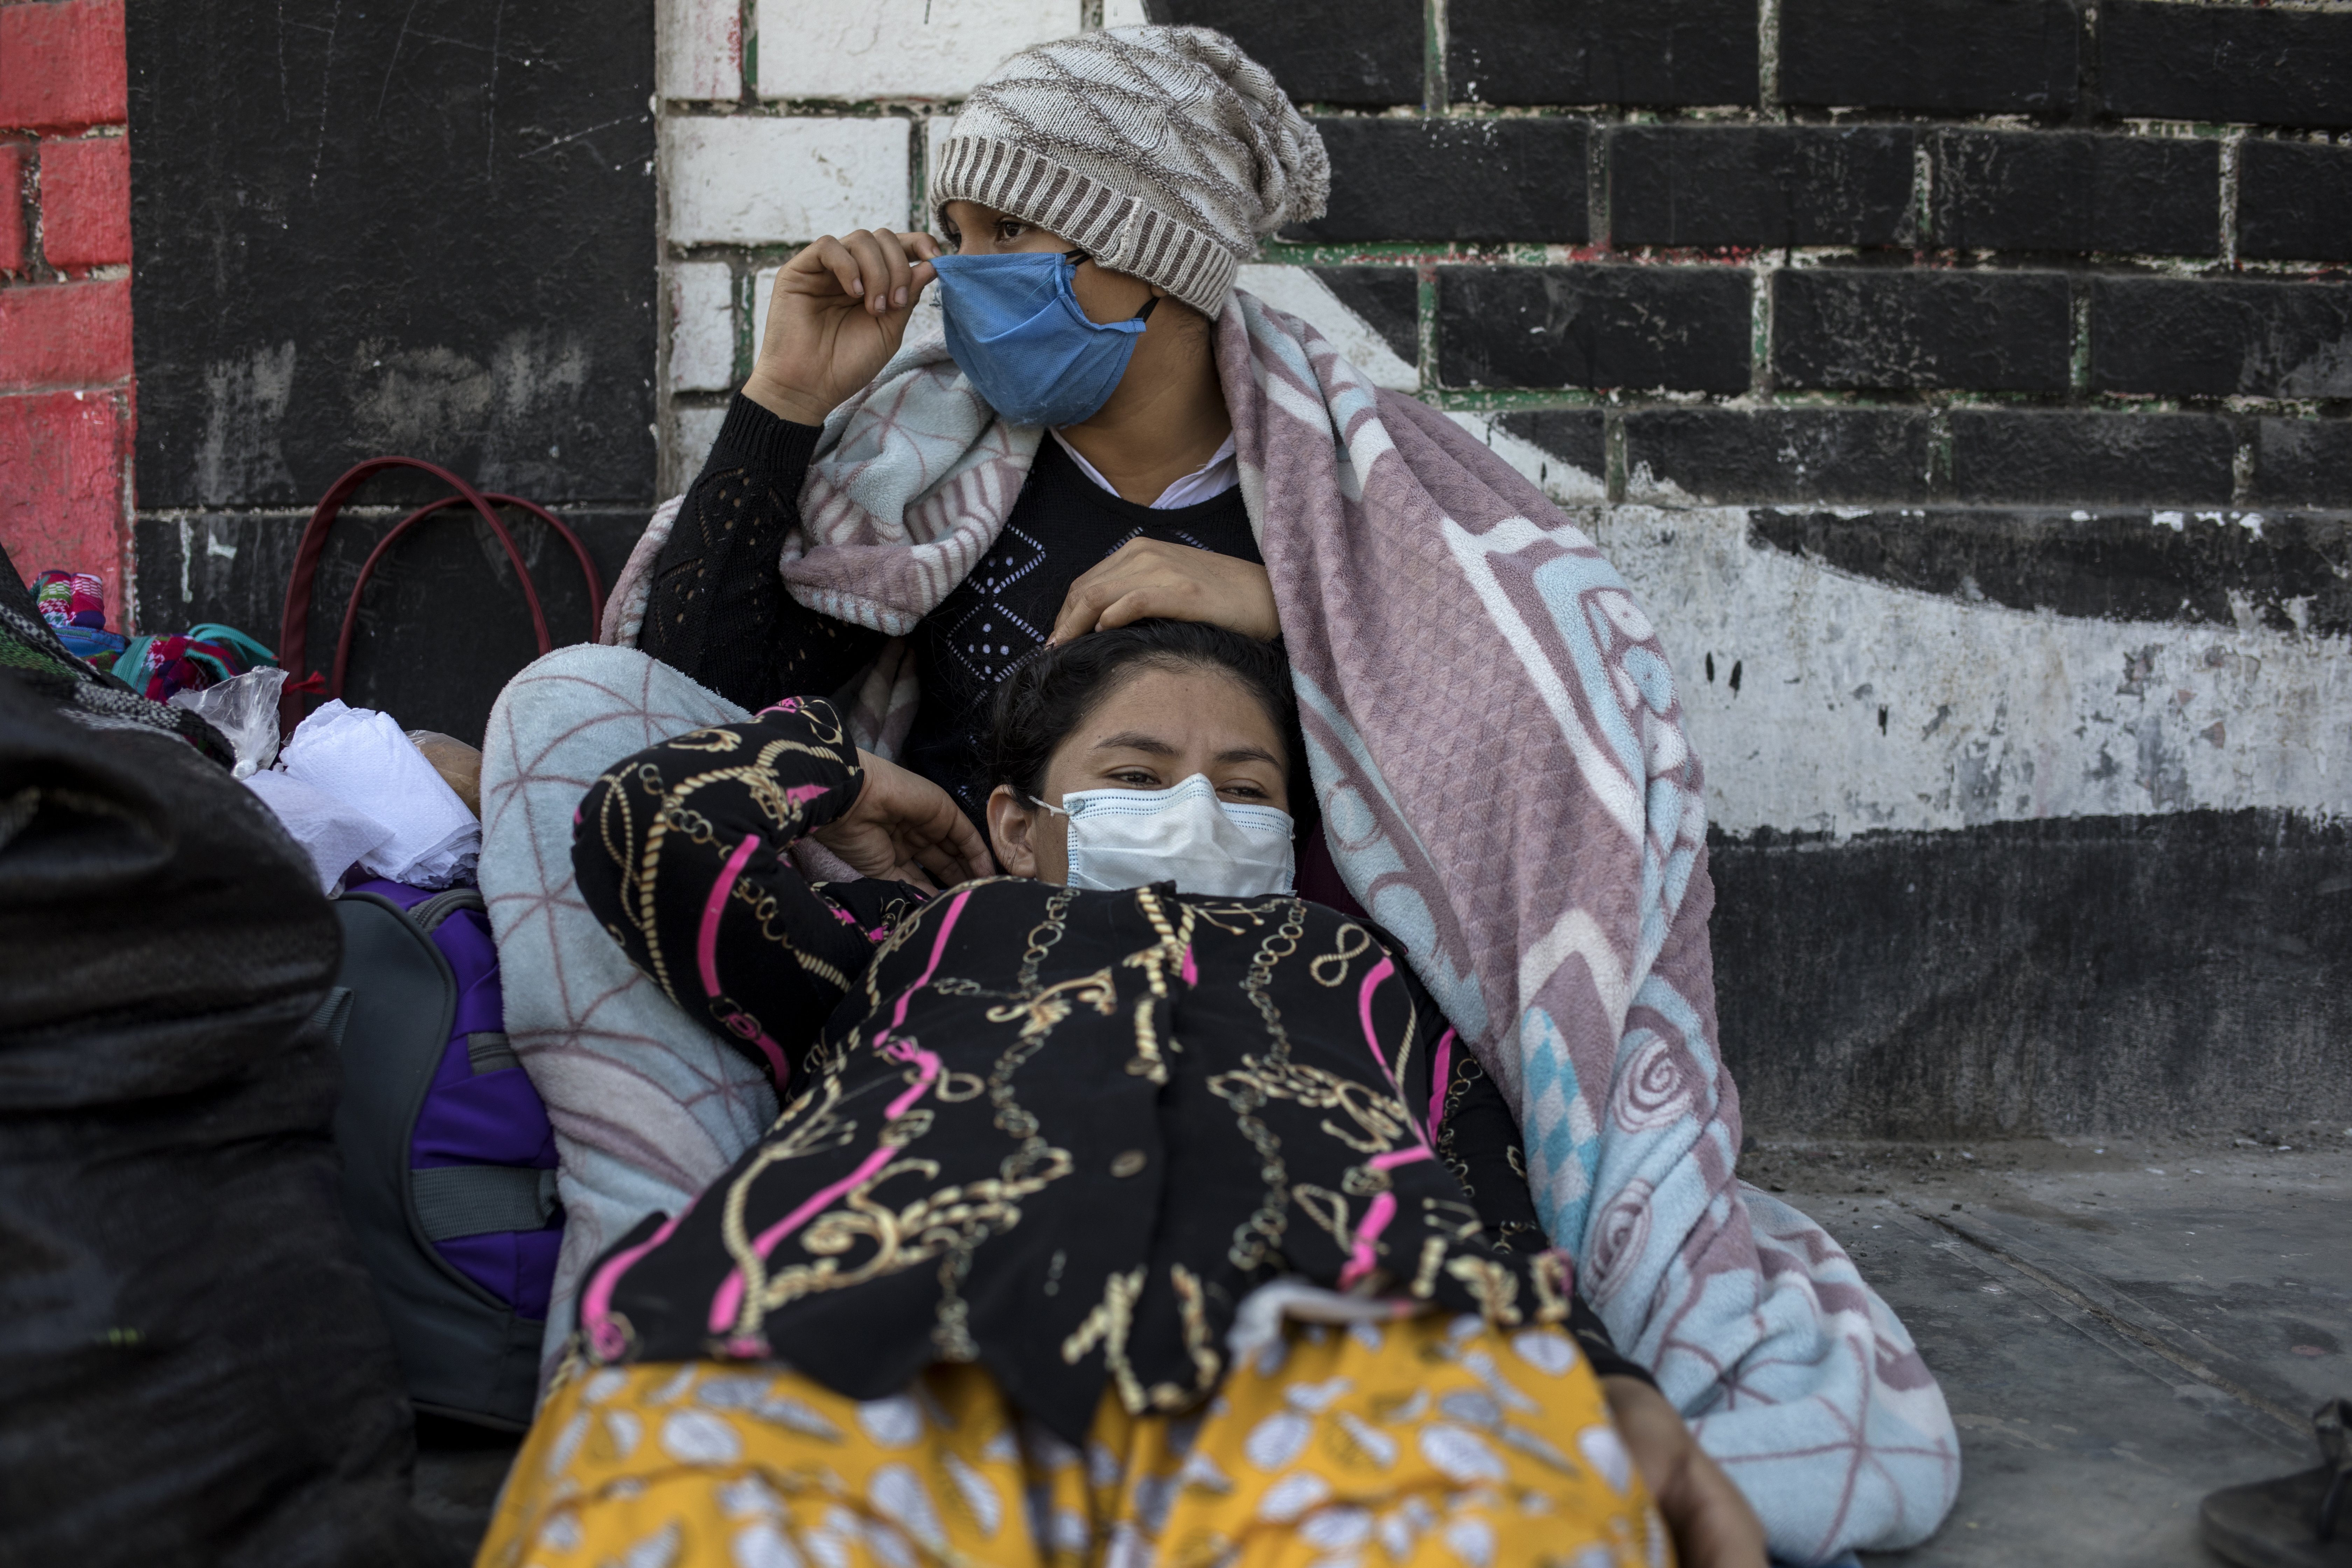 Milka Segura, 15, rests with her sister Ruth, 20, in a makeshift camp on the side of a highway, Tuesday, April 21, 2020, in Lima, Peru. After not being allowed to leave the capital because the strict quarantine rules amid the new coronavirus pandemic, day laborers and informal workers are now allowed to travel home. (AP Photo/Rodrigo Abd)